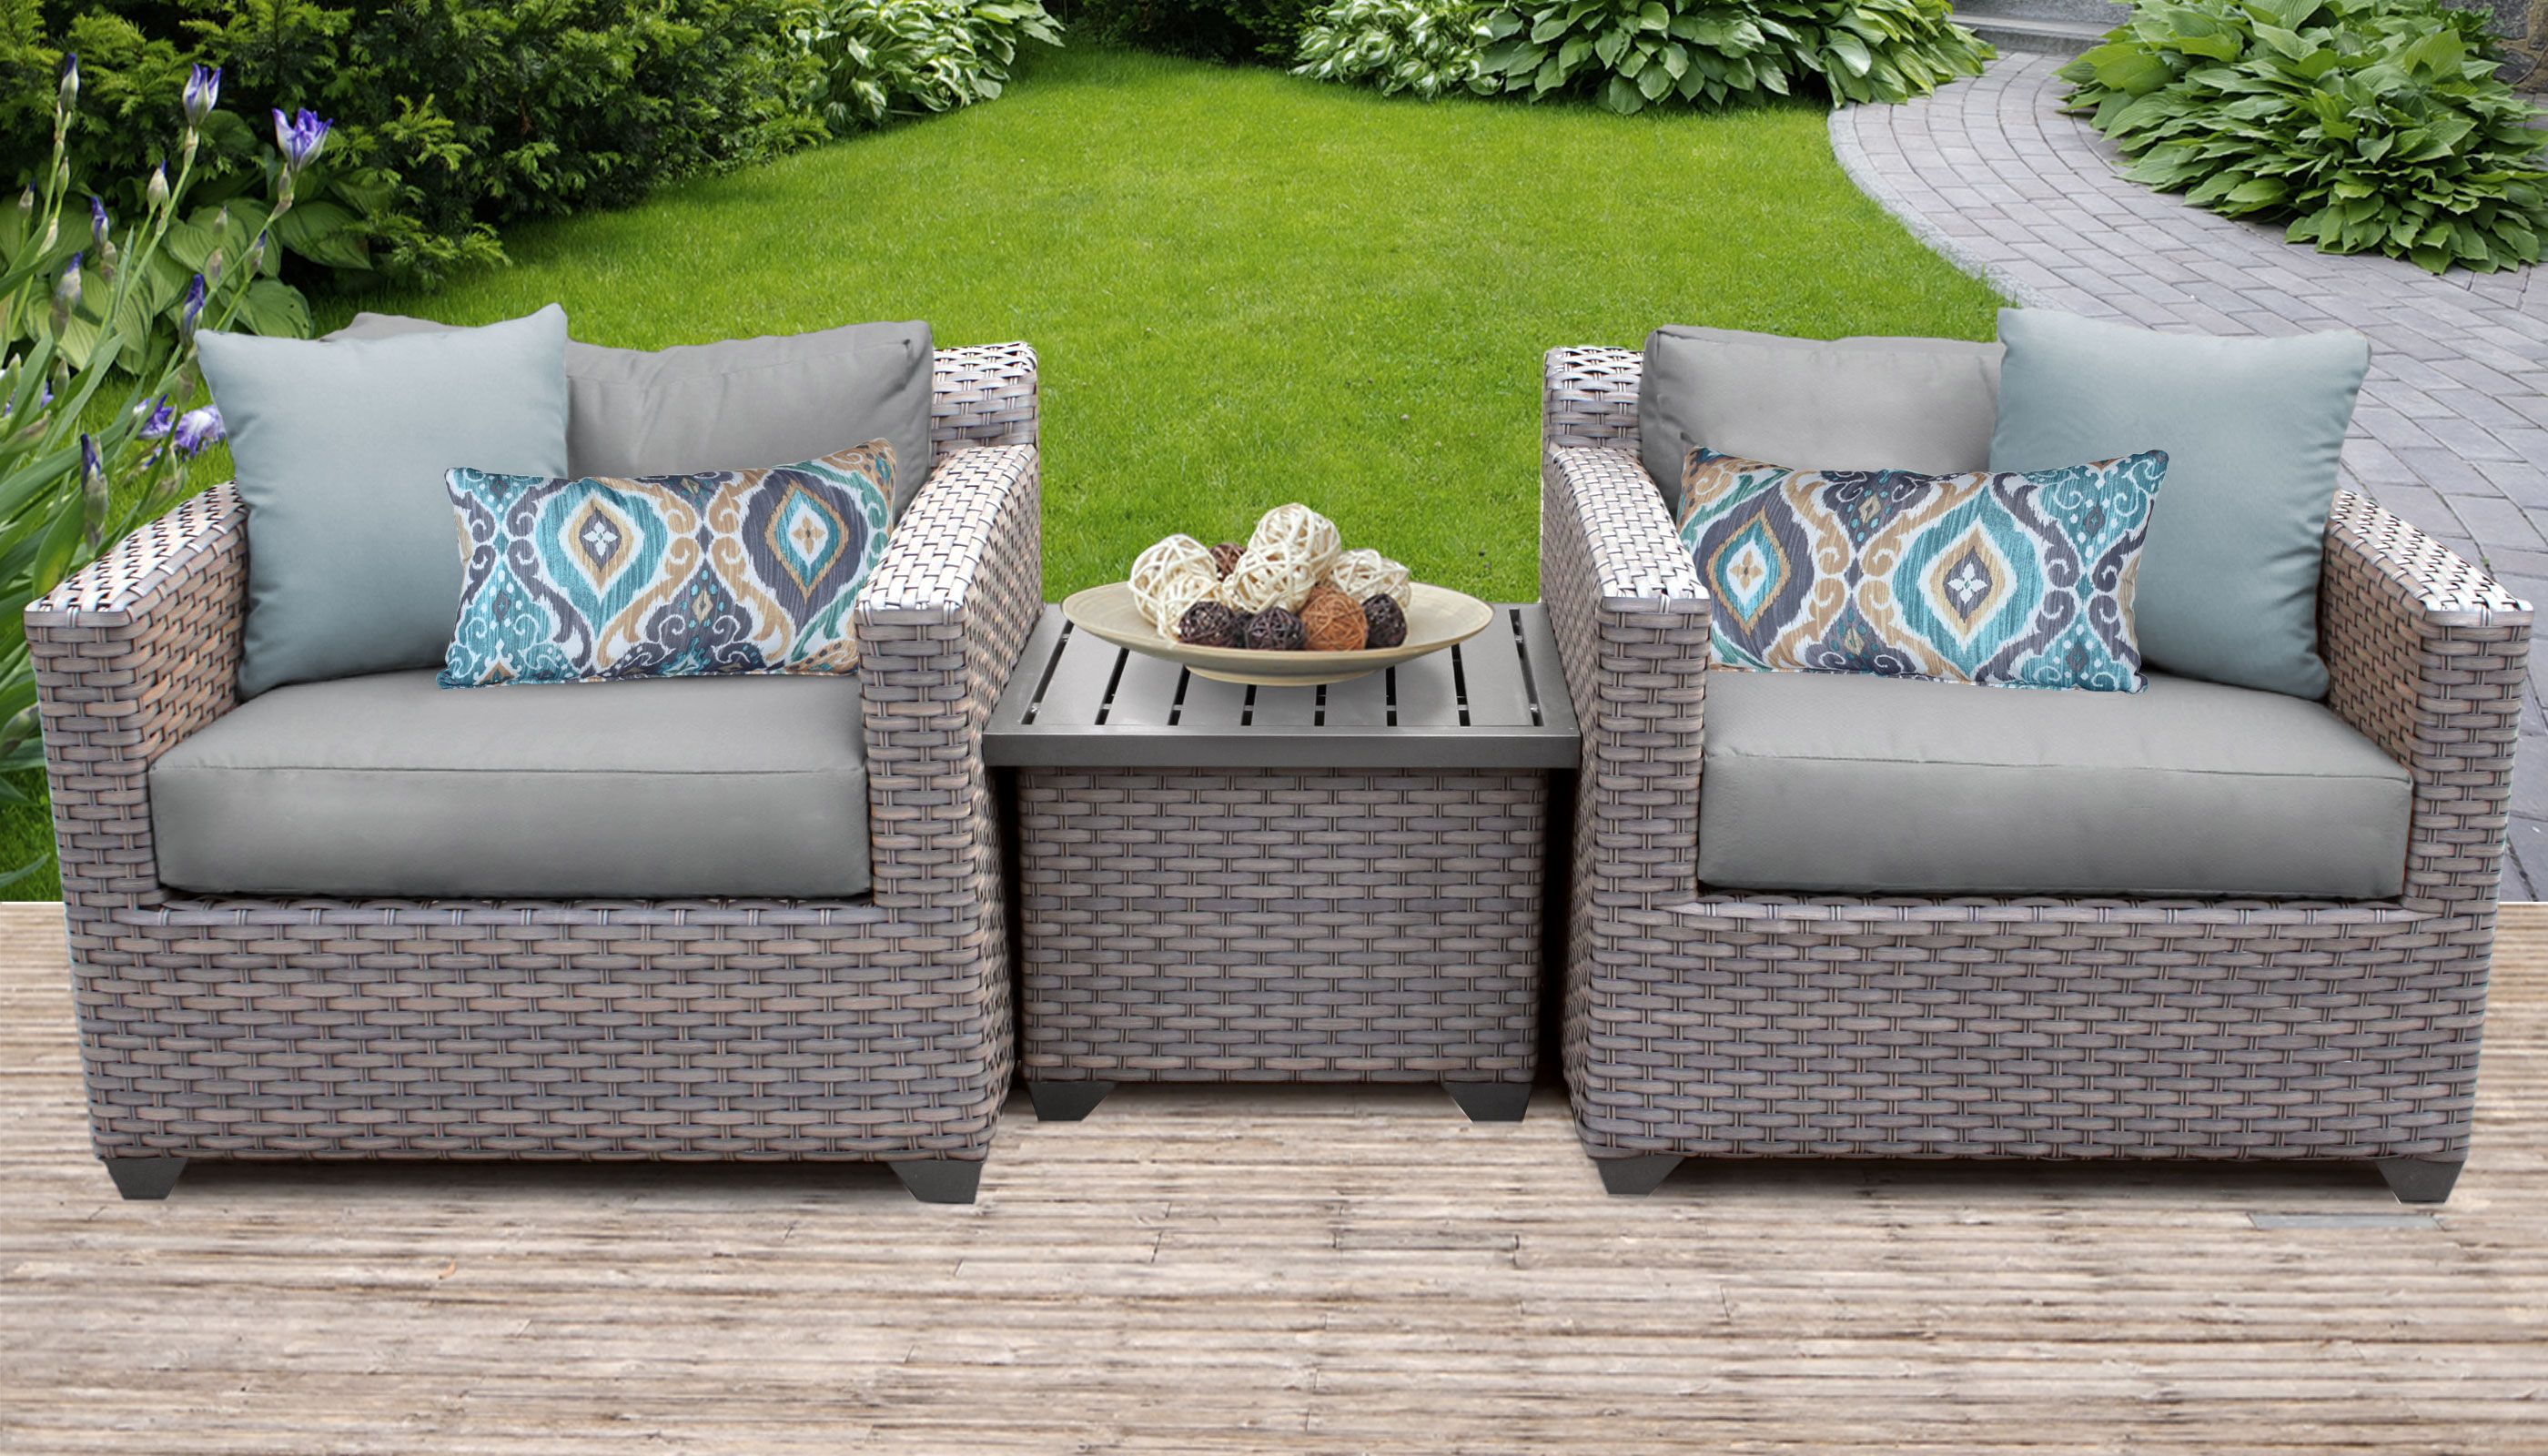 Florence 3 Piece Outdoor Wicker Patio Furniture Set 03a For Fashionable Outdoor Wicker 3 Piece Set (View 11 of 15)